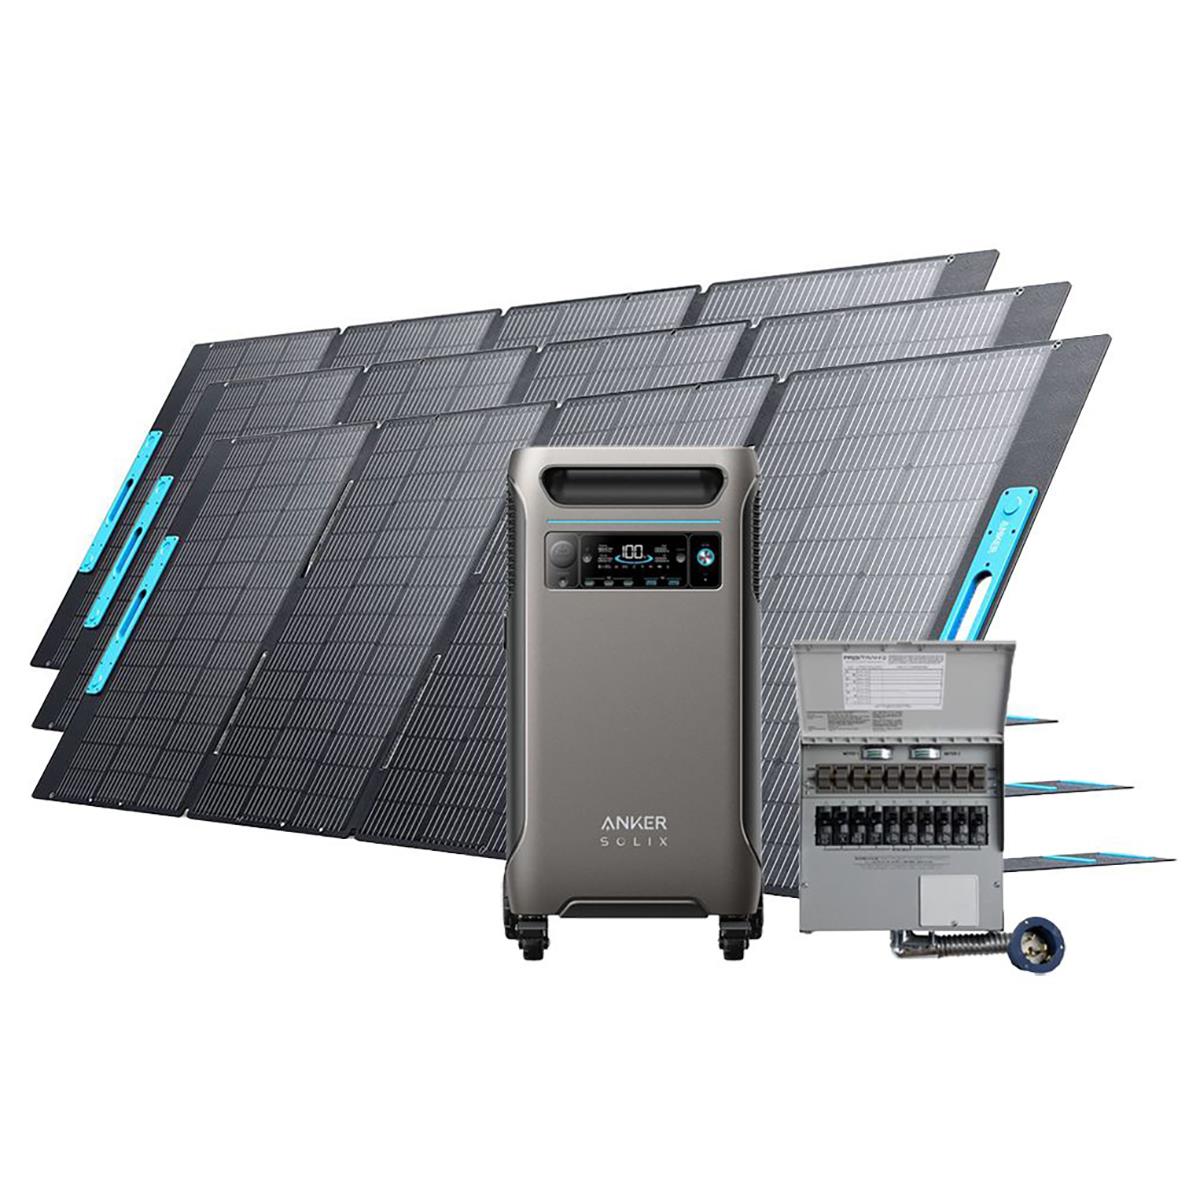 Image of Anker SOLIX F3800 6000W Power Station with Transfer Switch &amp; 3x 400W Solar Panel